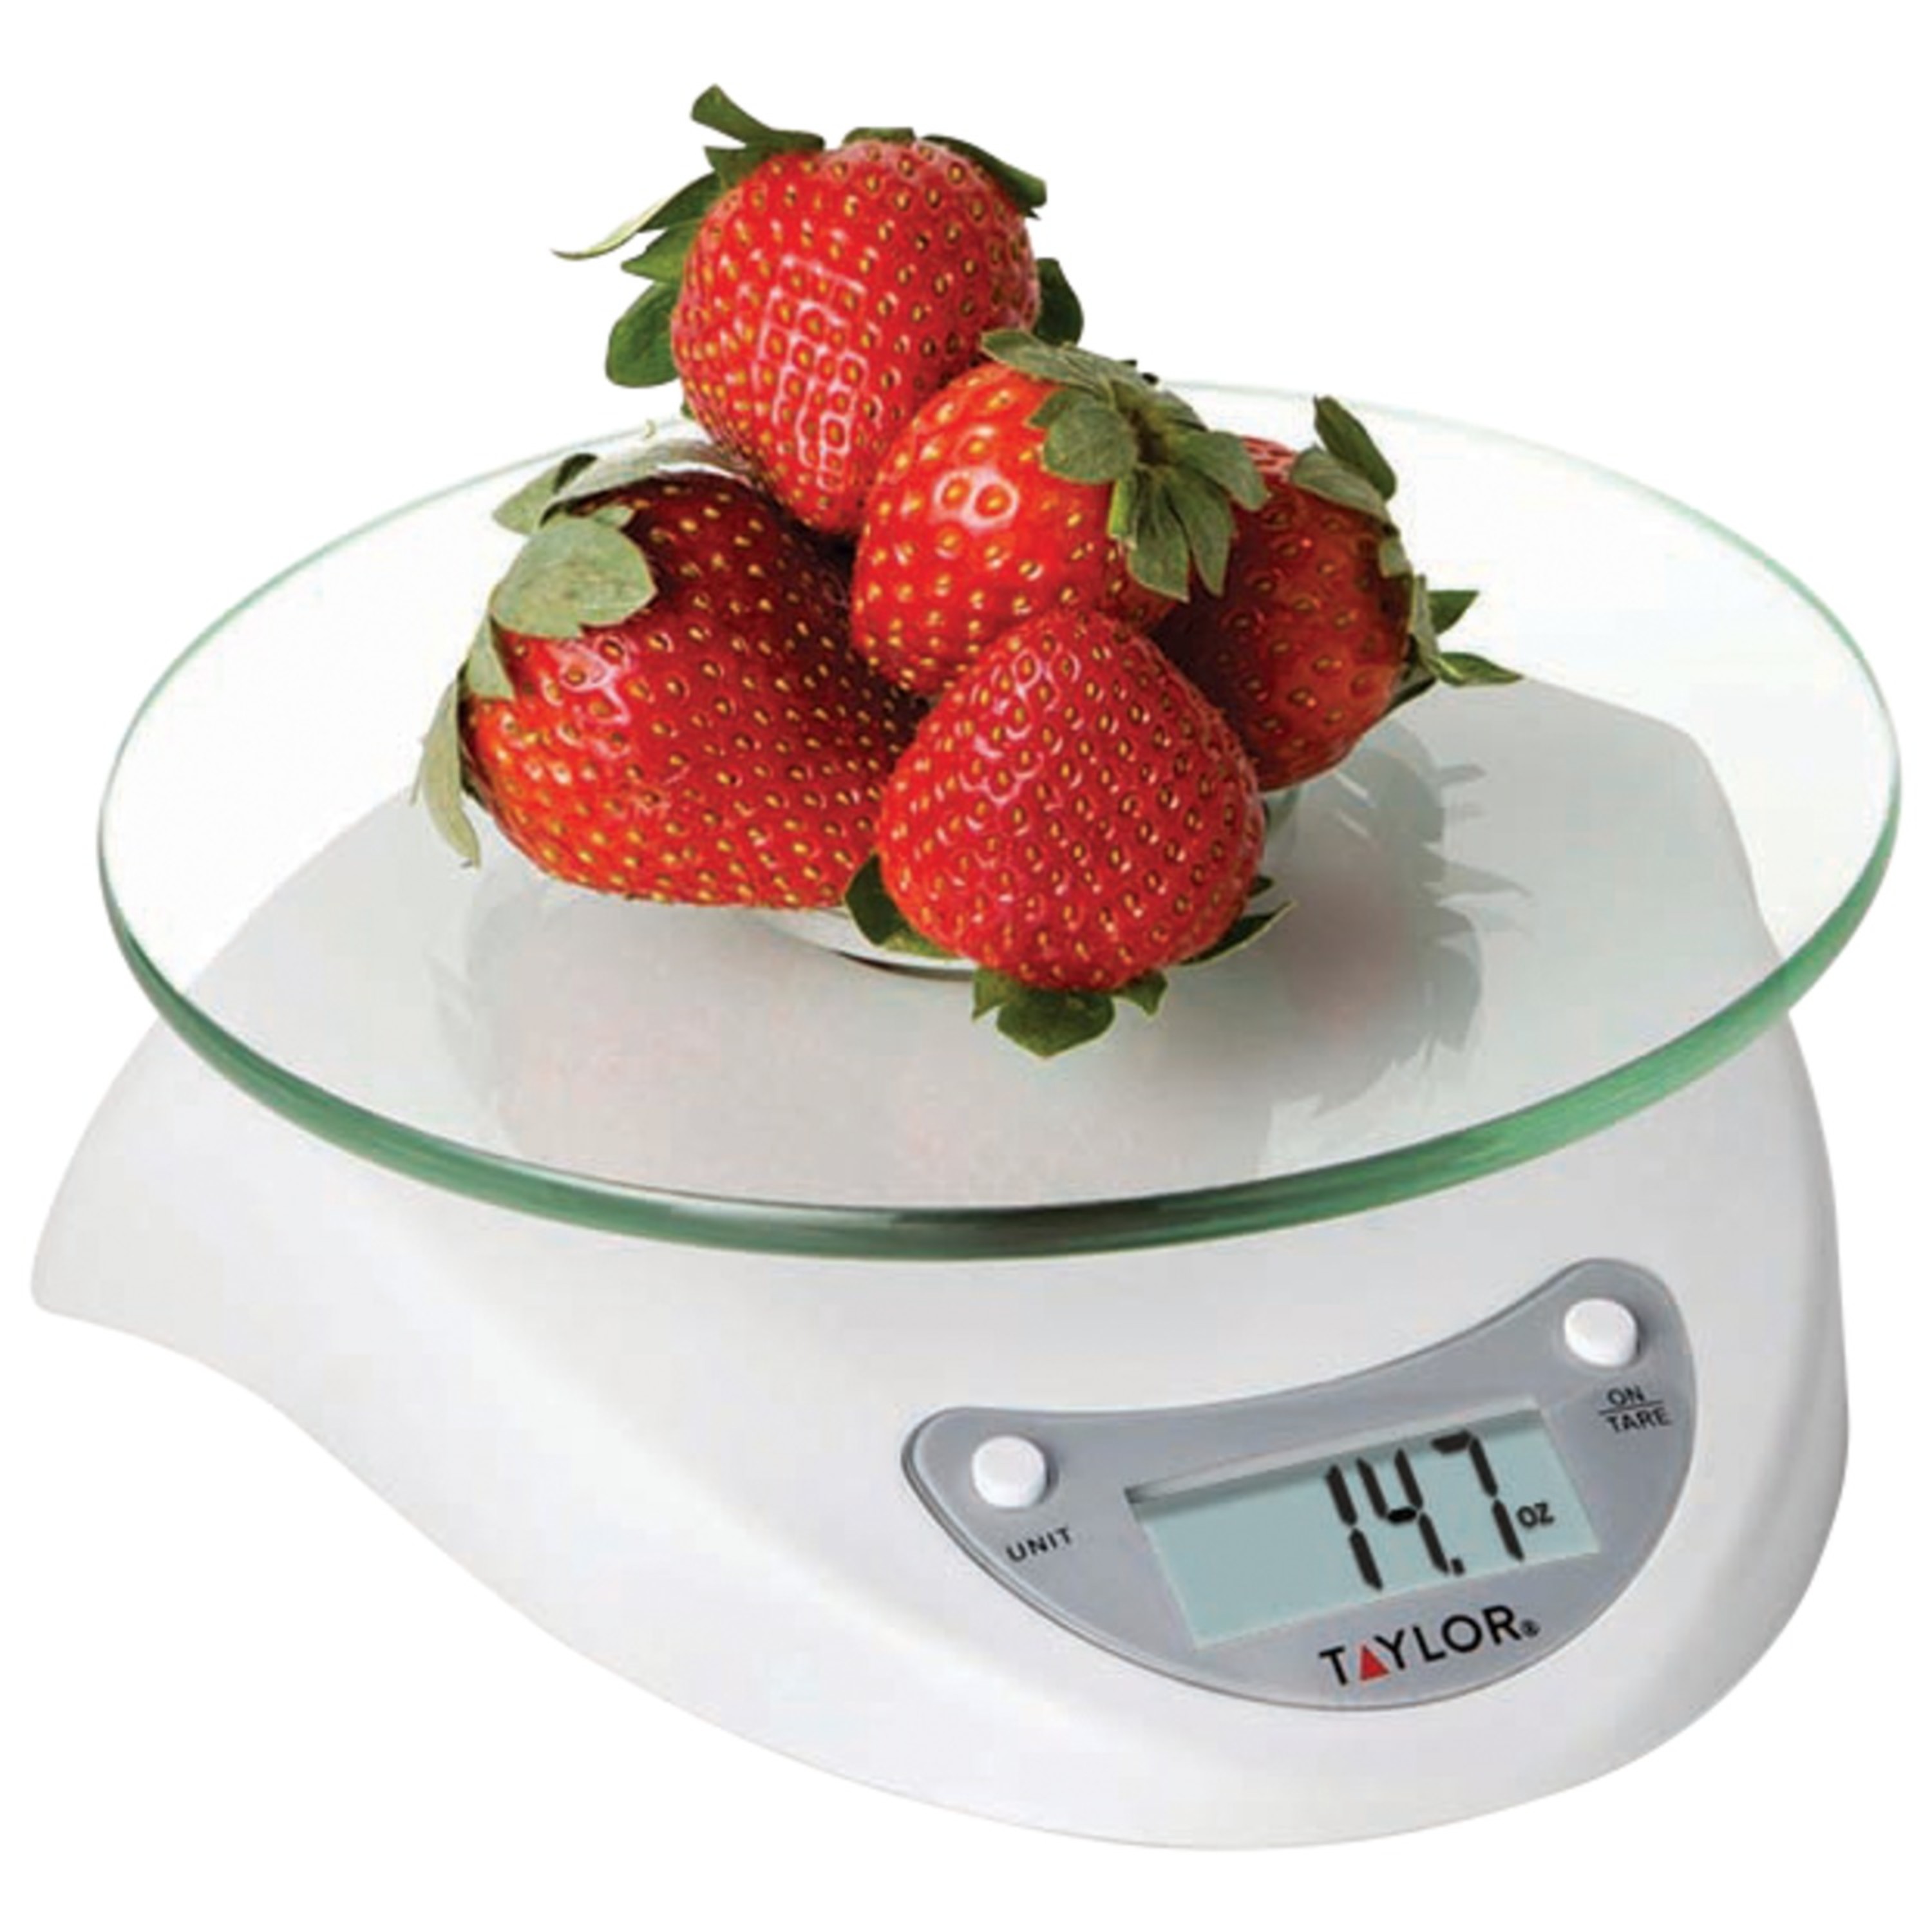 Taylor Digital Glass Platform White Base Food Scale and Kitchen Scale - image 5 of 10